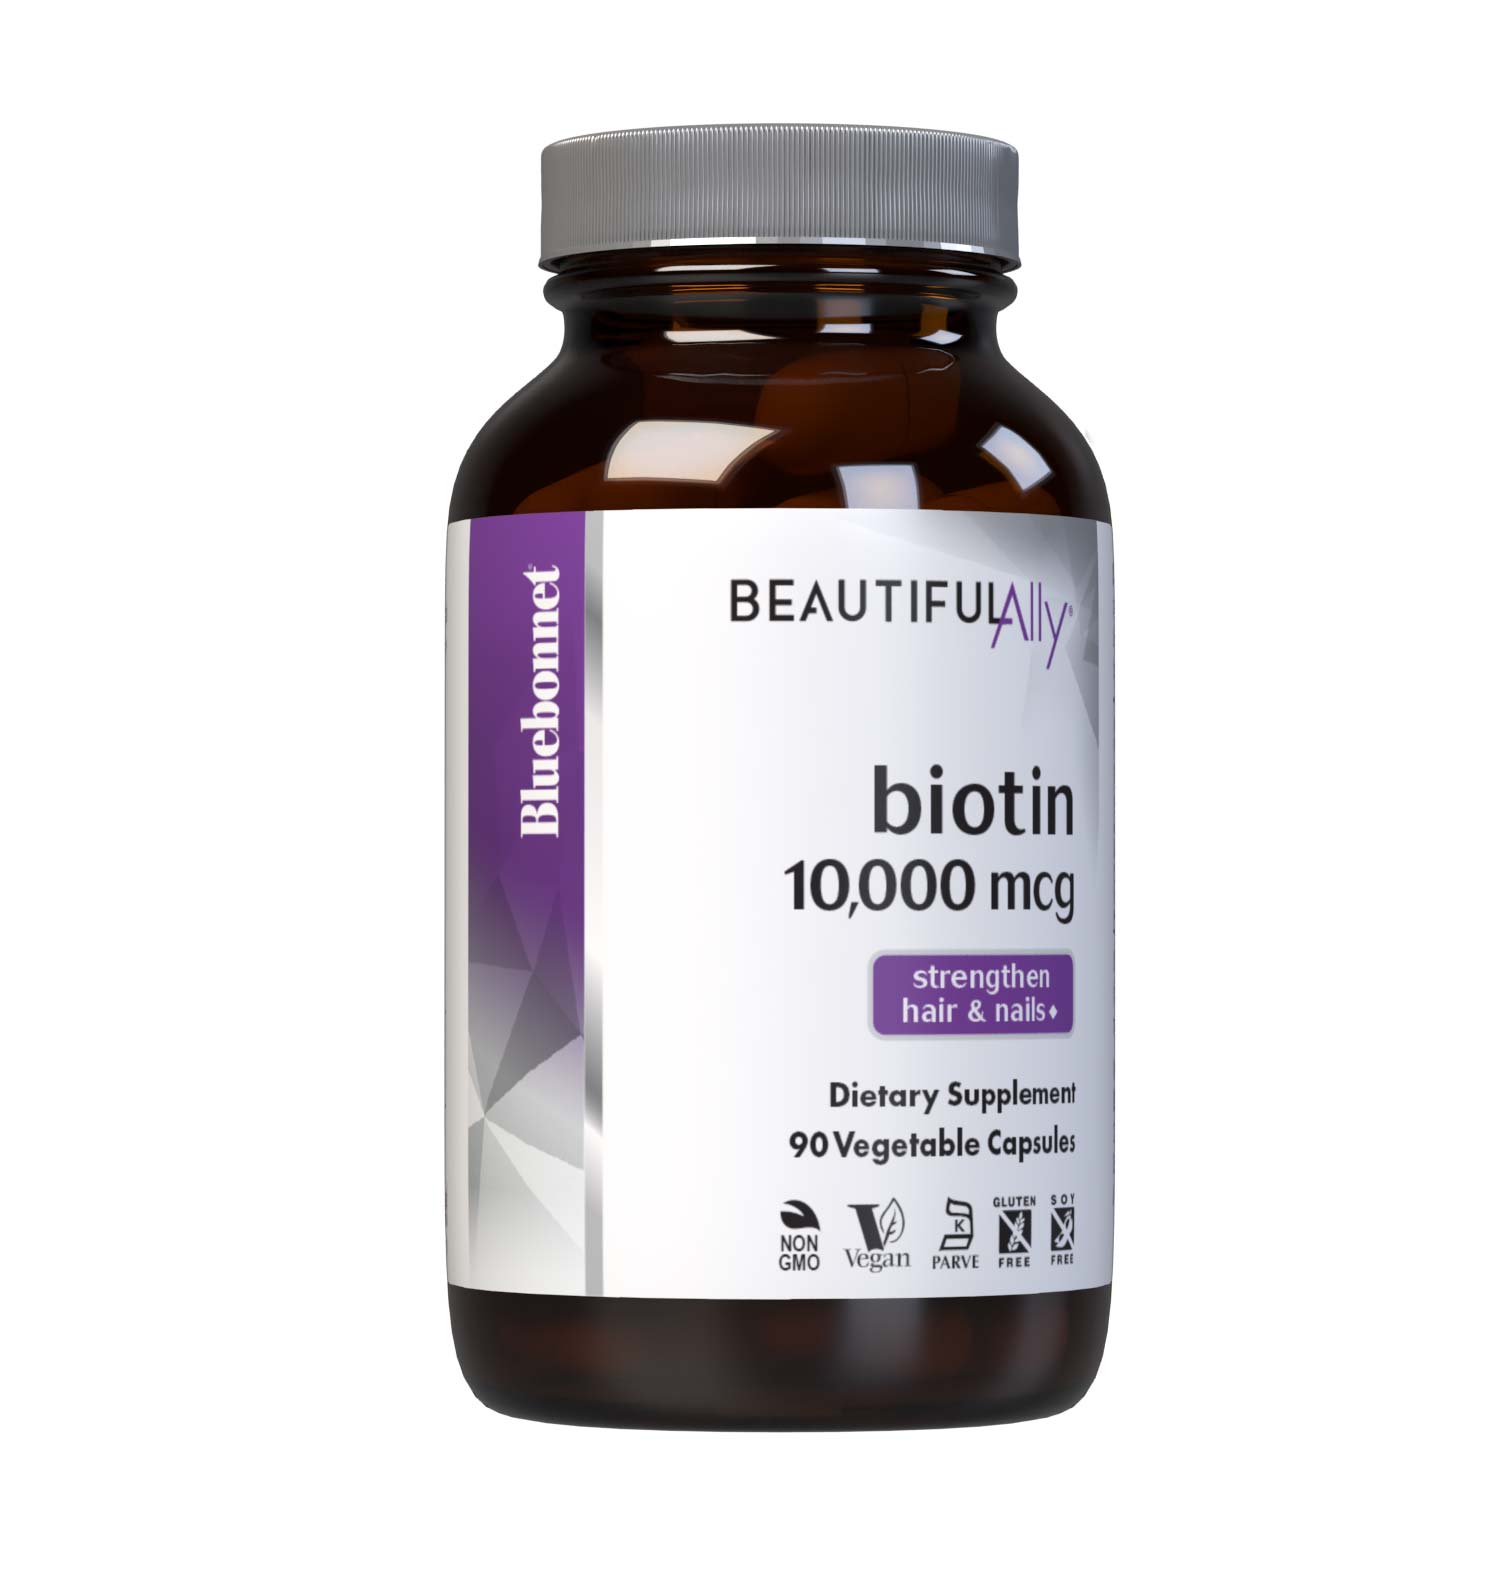 Bluebonnet’s Beautiful Ally Biotin 10,000 mcg 90 Vegetable Capsules are specially formulated to help strengthen hair and nails with yeast-free biotin, a water-soluble B vitamin, in its crystalline form. #size_90 count